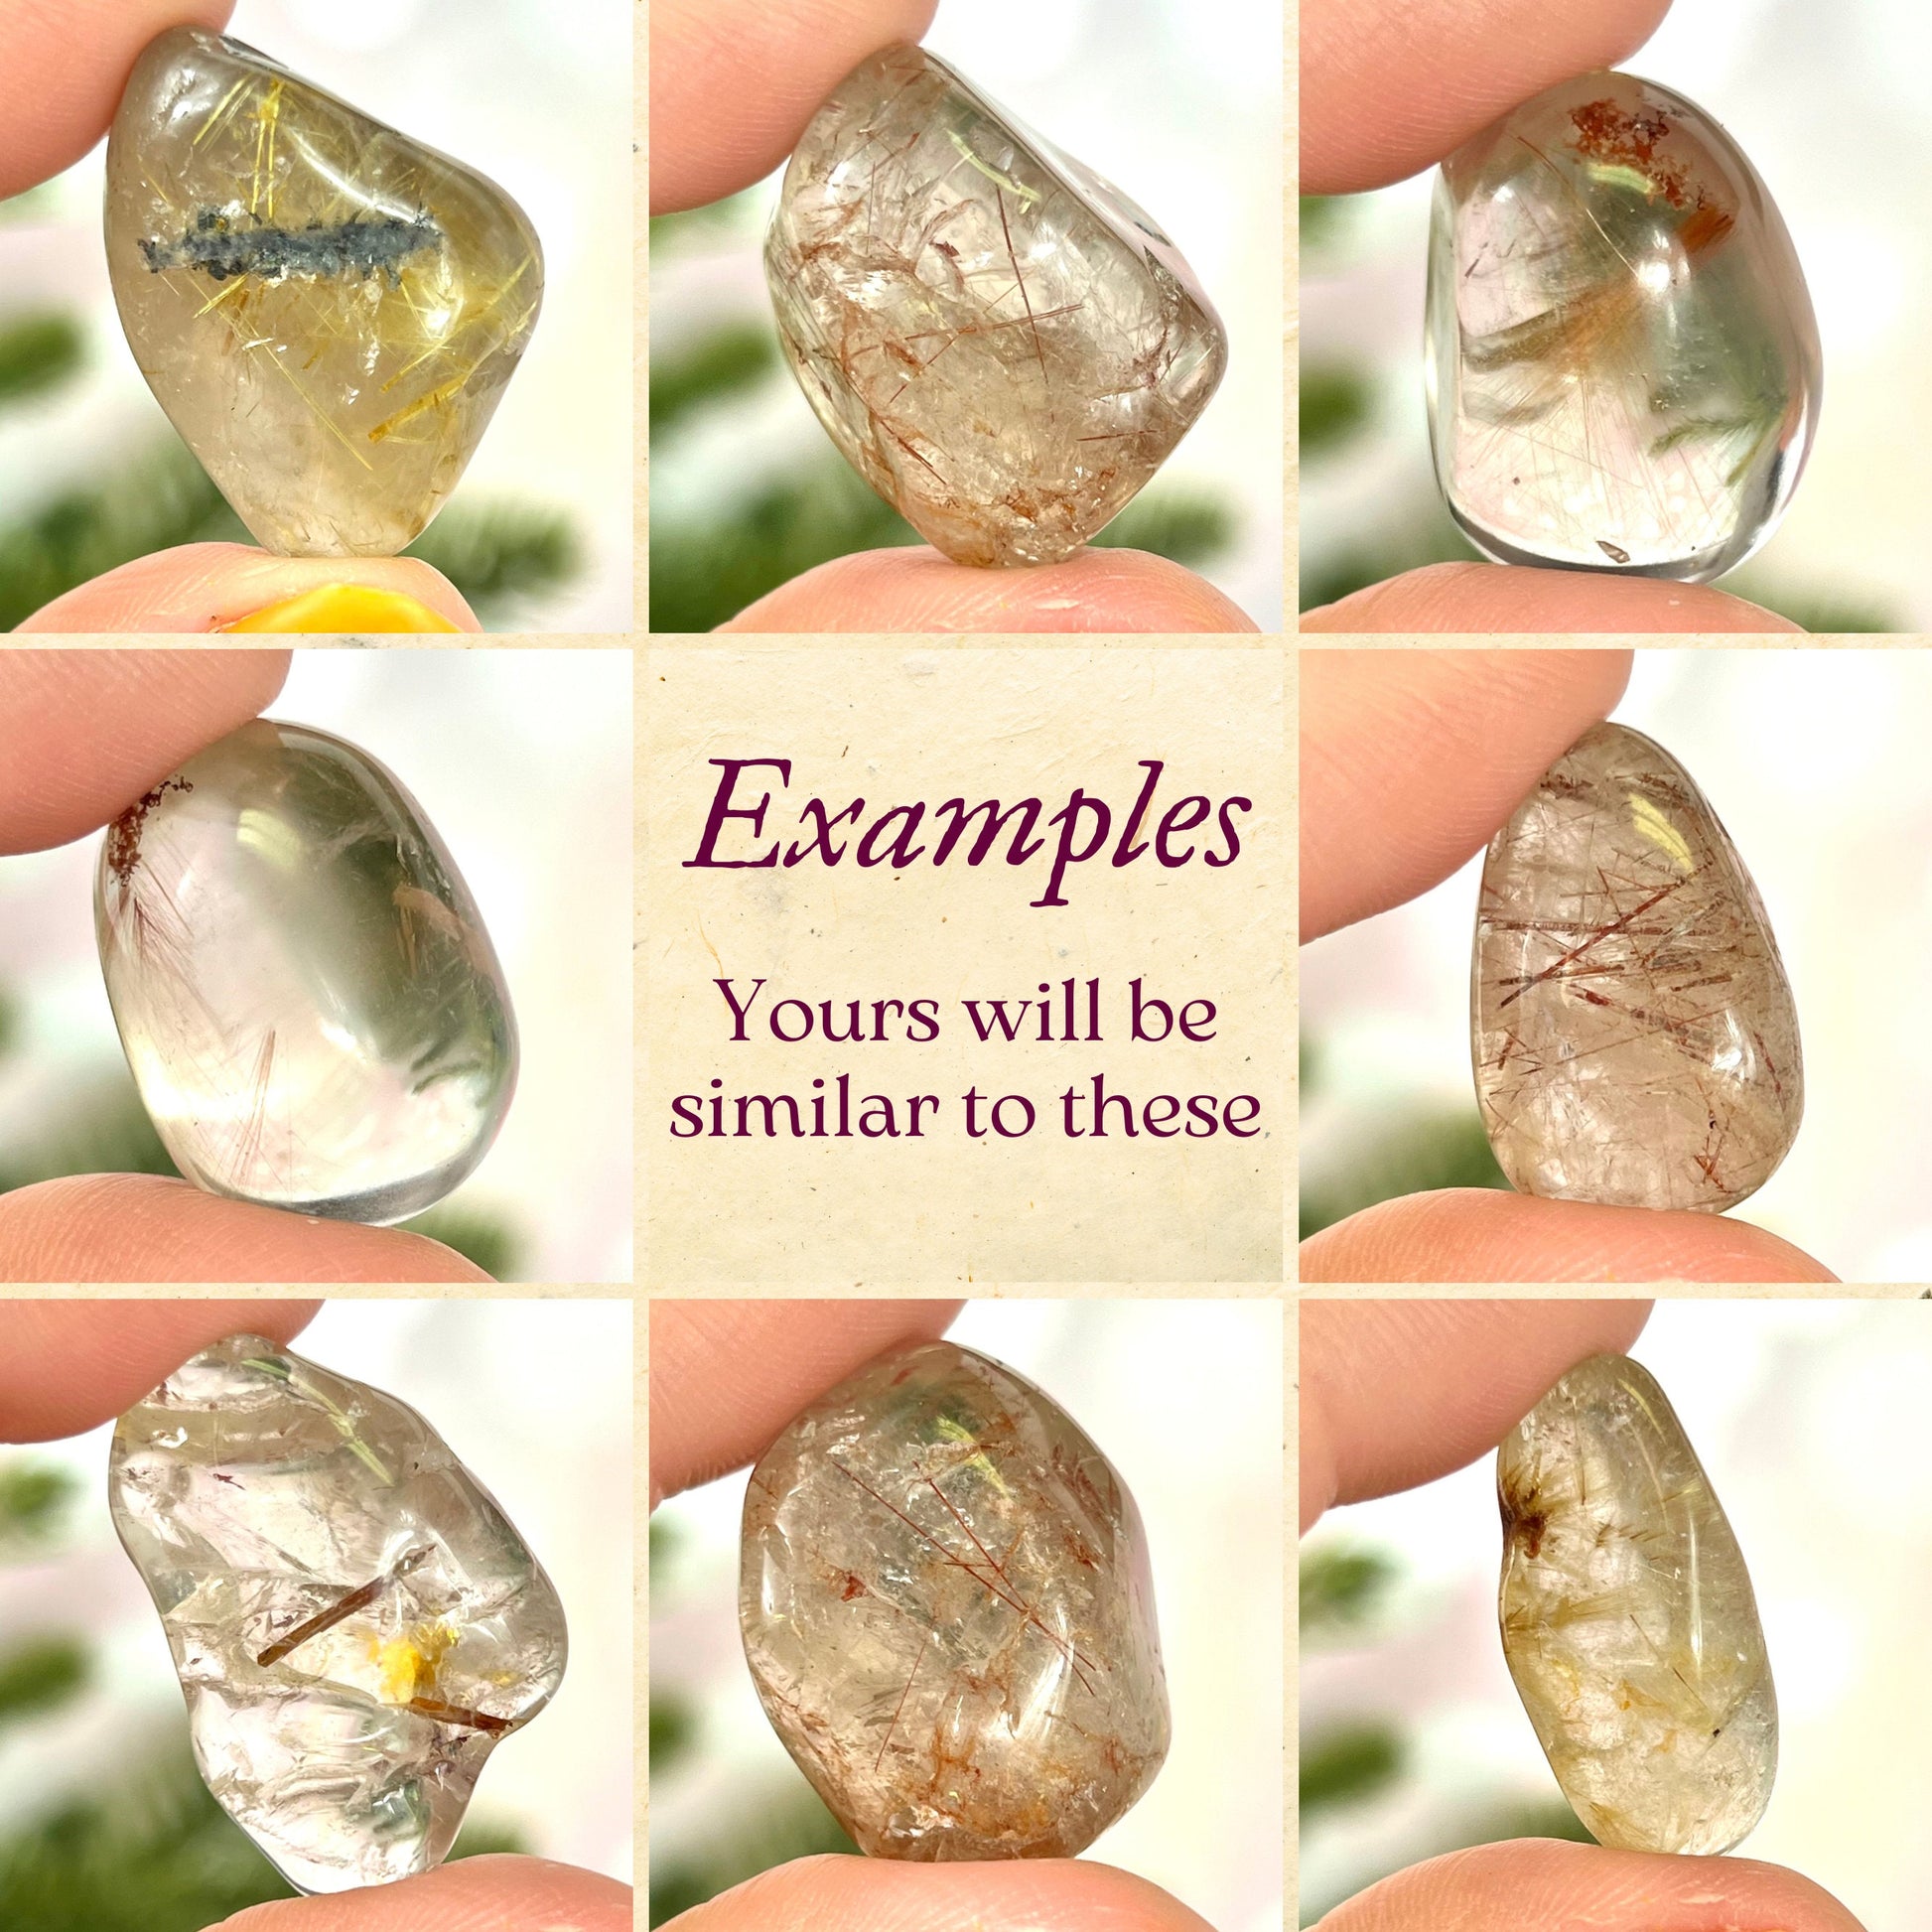 a collage showing a group of Golden rutilated quartz tumbled crystals